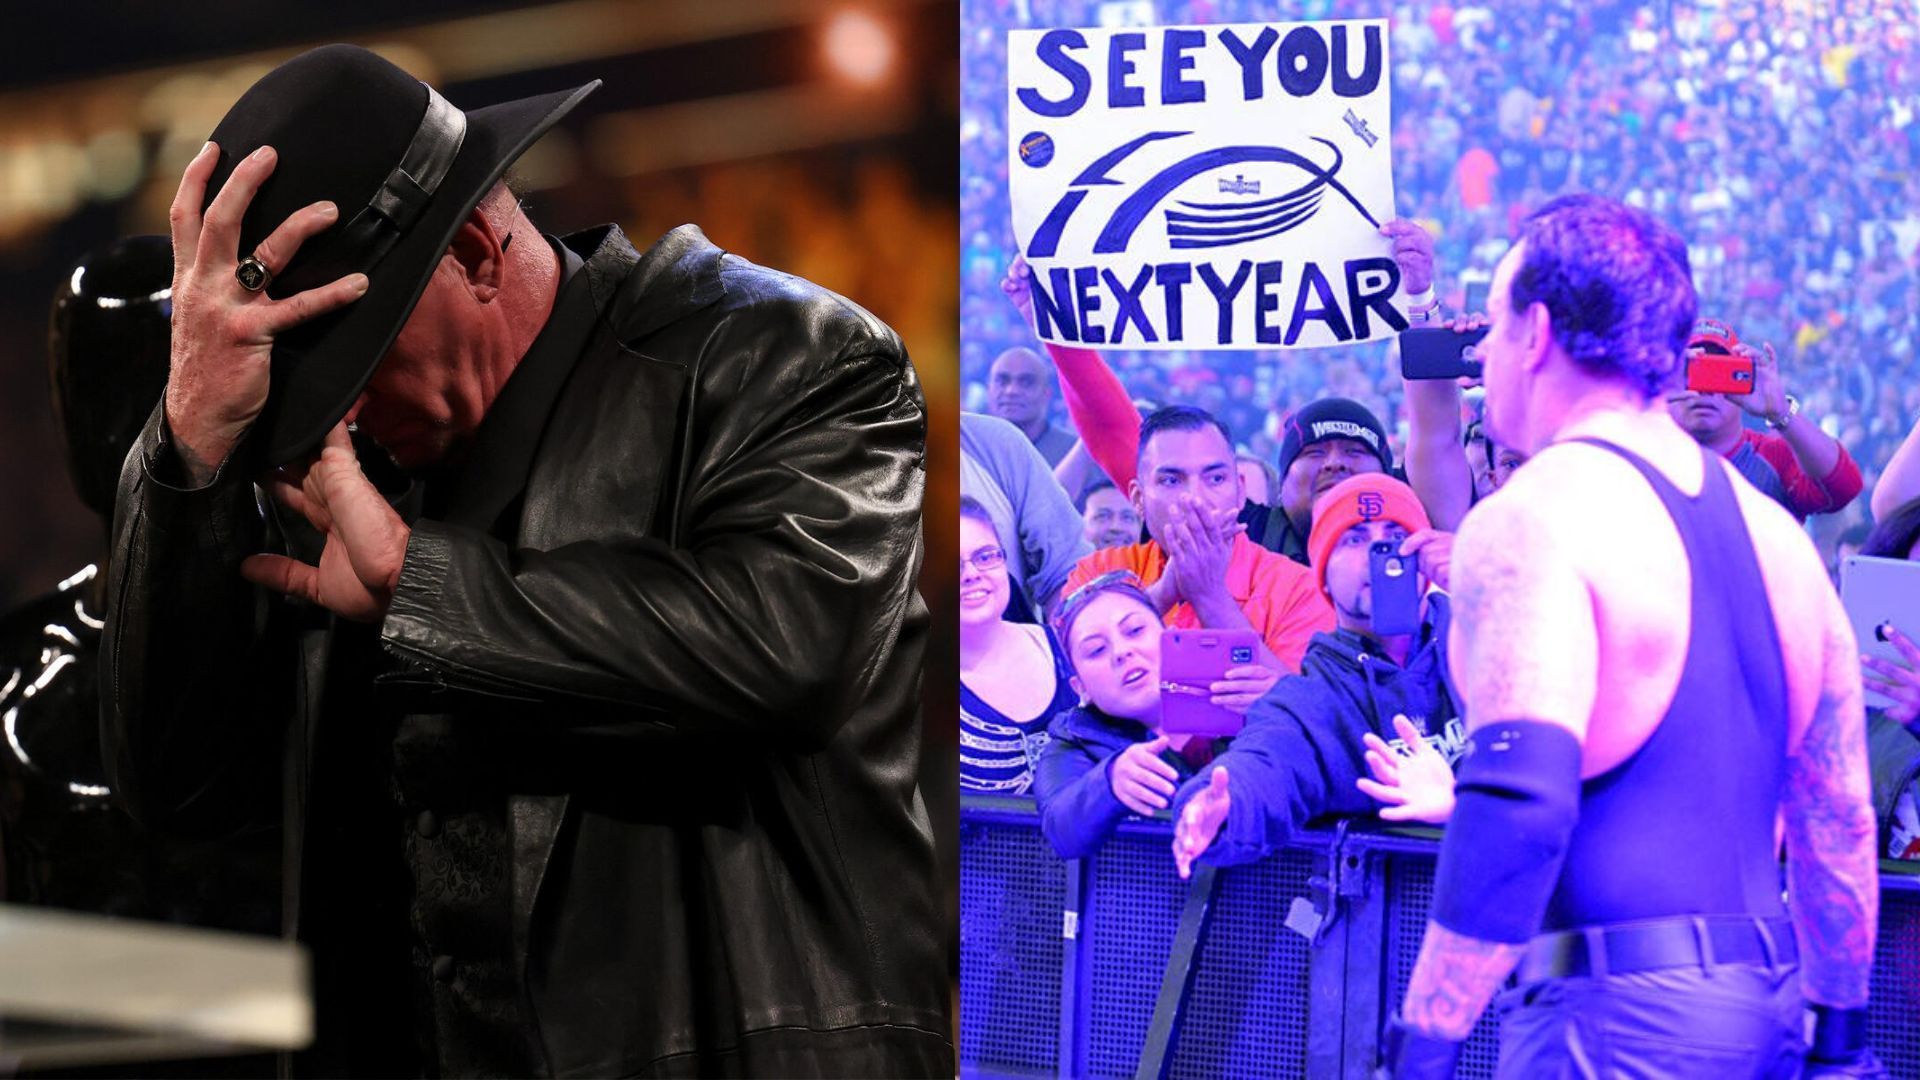 The Undertaker evokes the best reactions from fans (Credit: WWE)